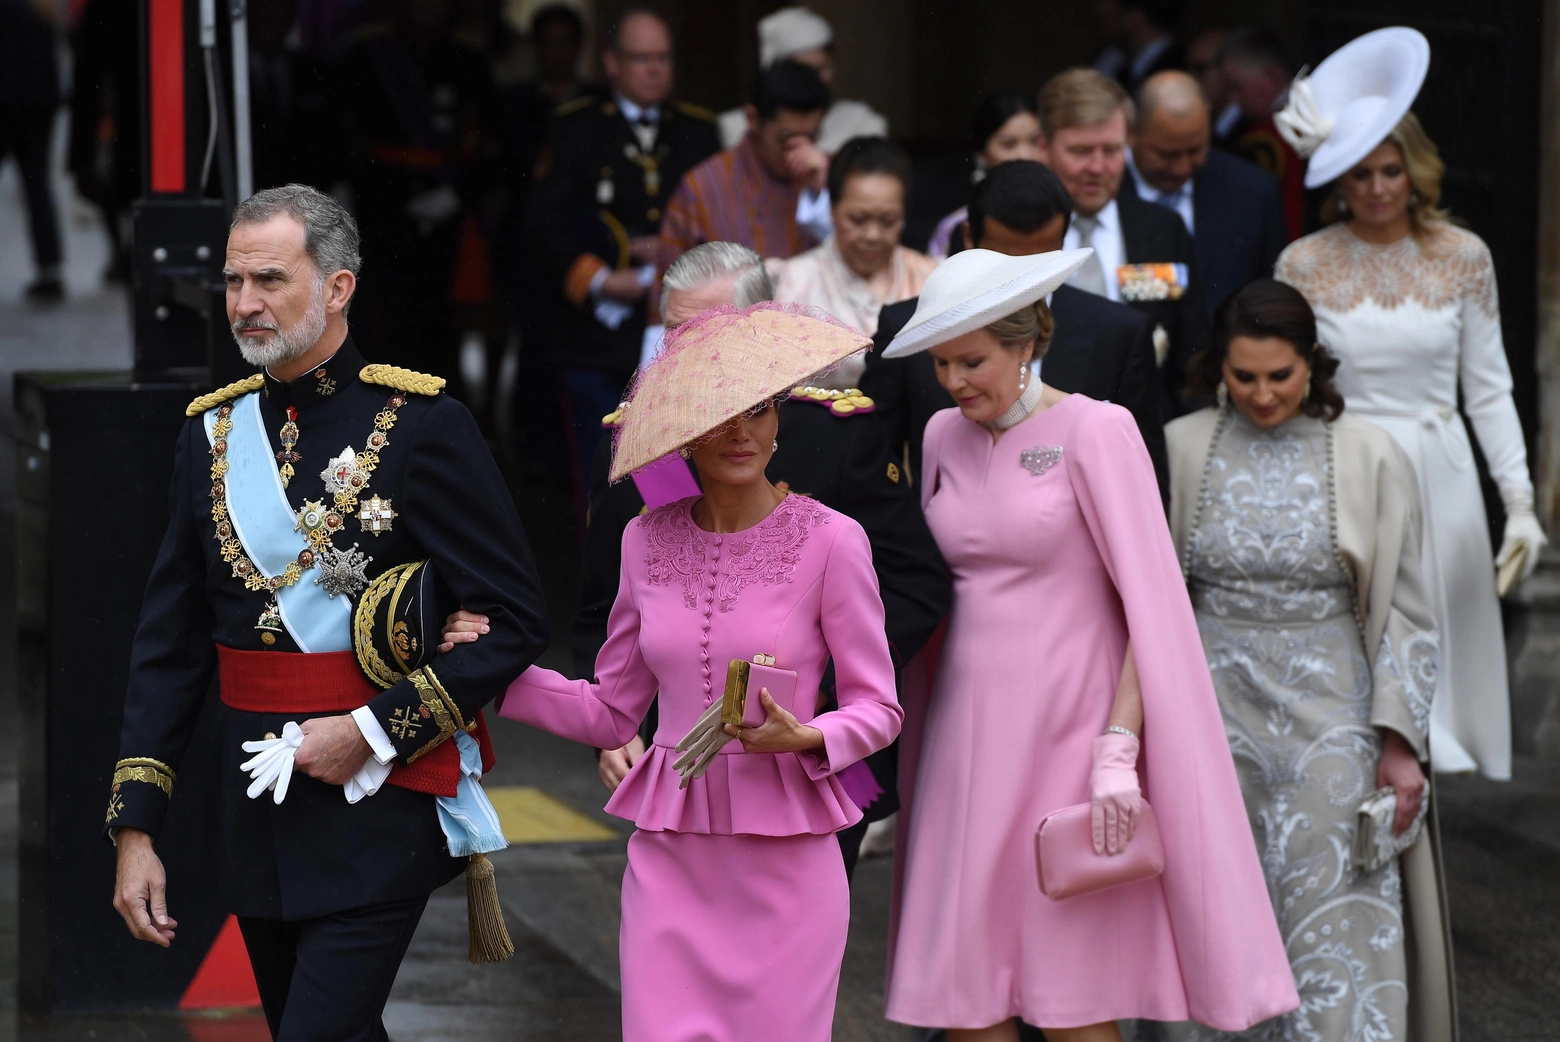 epa10611764 (L-R) King Felipe VI of Spain and Queen Letizia are followed by Belgian King Philippe (hidden) and Queen Mathilde as they arrive for the Coronation of Britain's King Charles III and Queen Camilla at Westminster Abbey in London, Britain, 06 May 2023. Coronations of British Kings and Queens have taken place at Westminster Abbey for the last 900 years. The service will be attended by around 100 heads of state from around the world.  EPA/Andy Rain